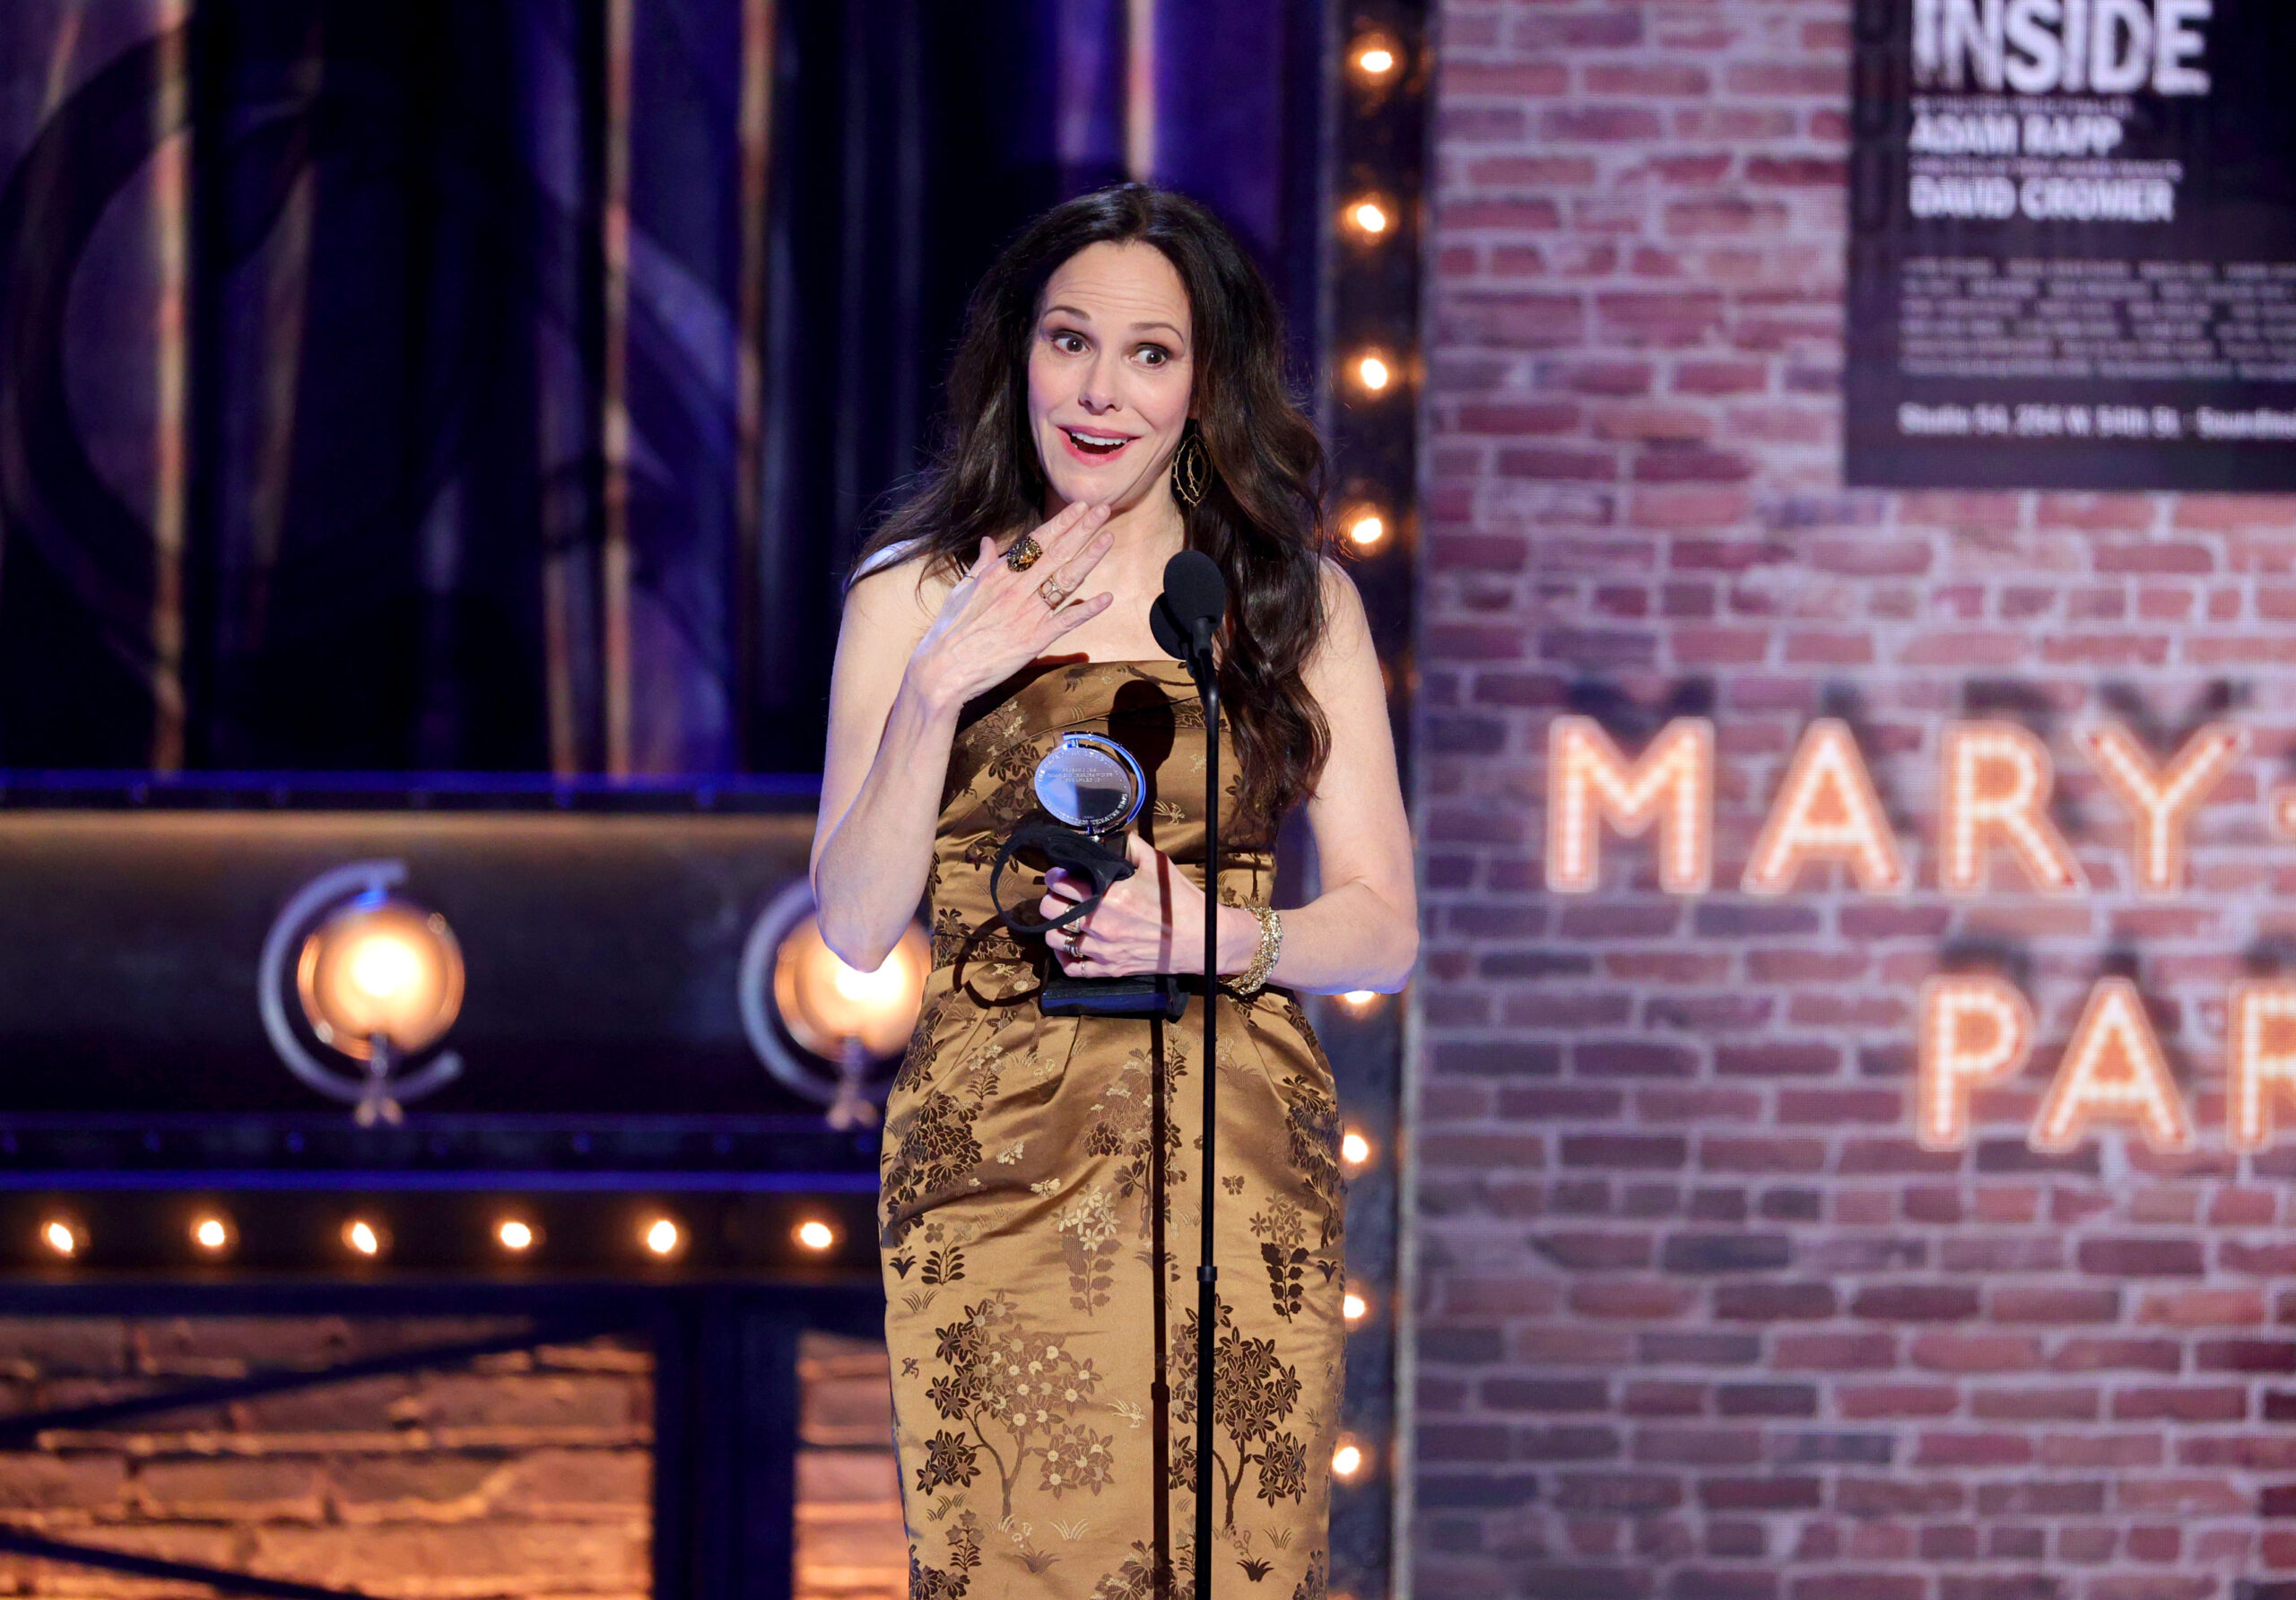 NEW YORK, NEW YORK - SEPTEMBER 26: Mary-Louise Parker accepts the award for Best Performance by an Actress in a Leading Role in a Play for "The Sound Inside" onstage during the 74th Annual Tony Awards at Winter Garden Theatre on September 26, 2021 in New York City. (Photo by Theo Wargo/Getty Images for Tony Awards Productions)